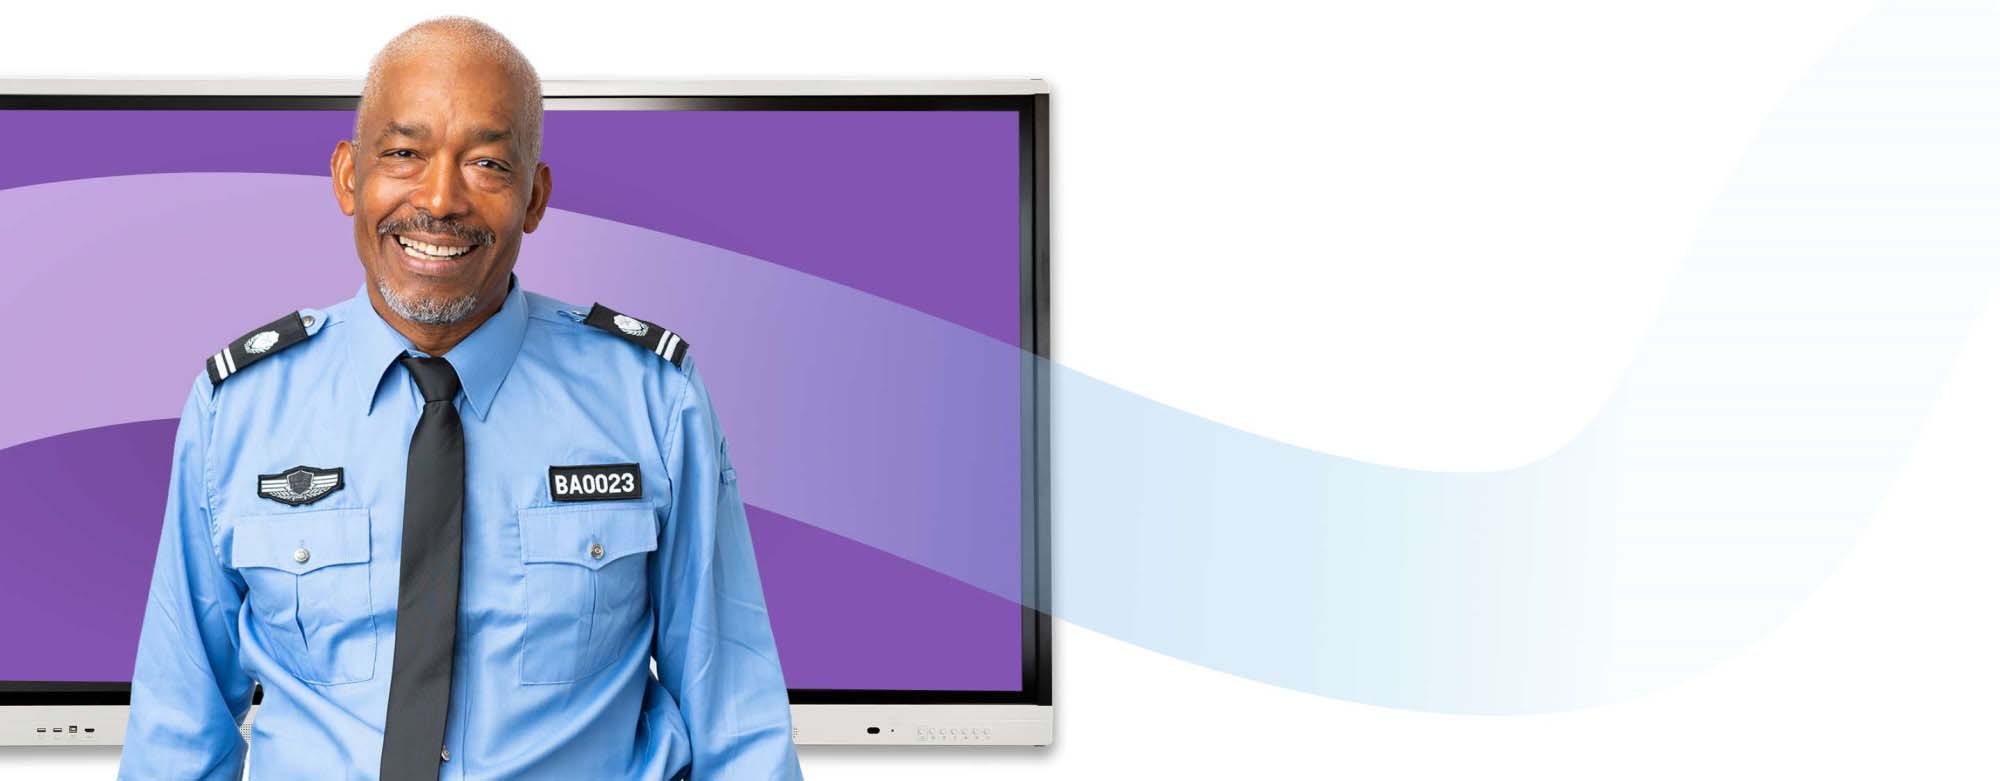 A security officer in blue uniform smiling confidently while standing next to a SMART Board interactive display, which is off to the side in the image.